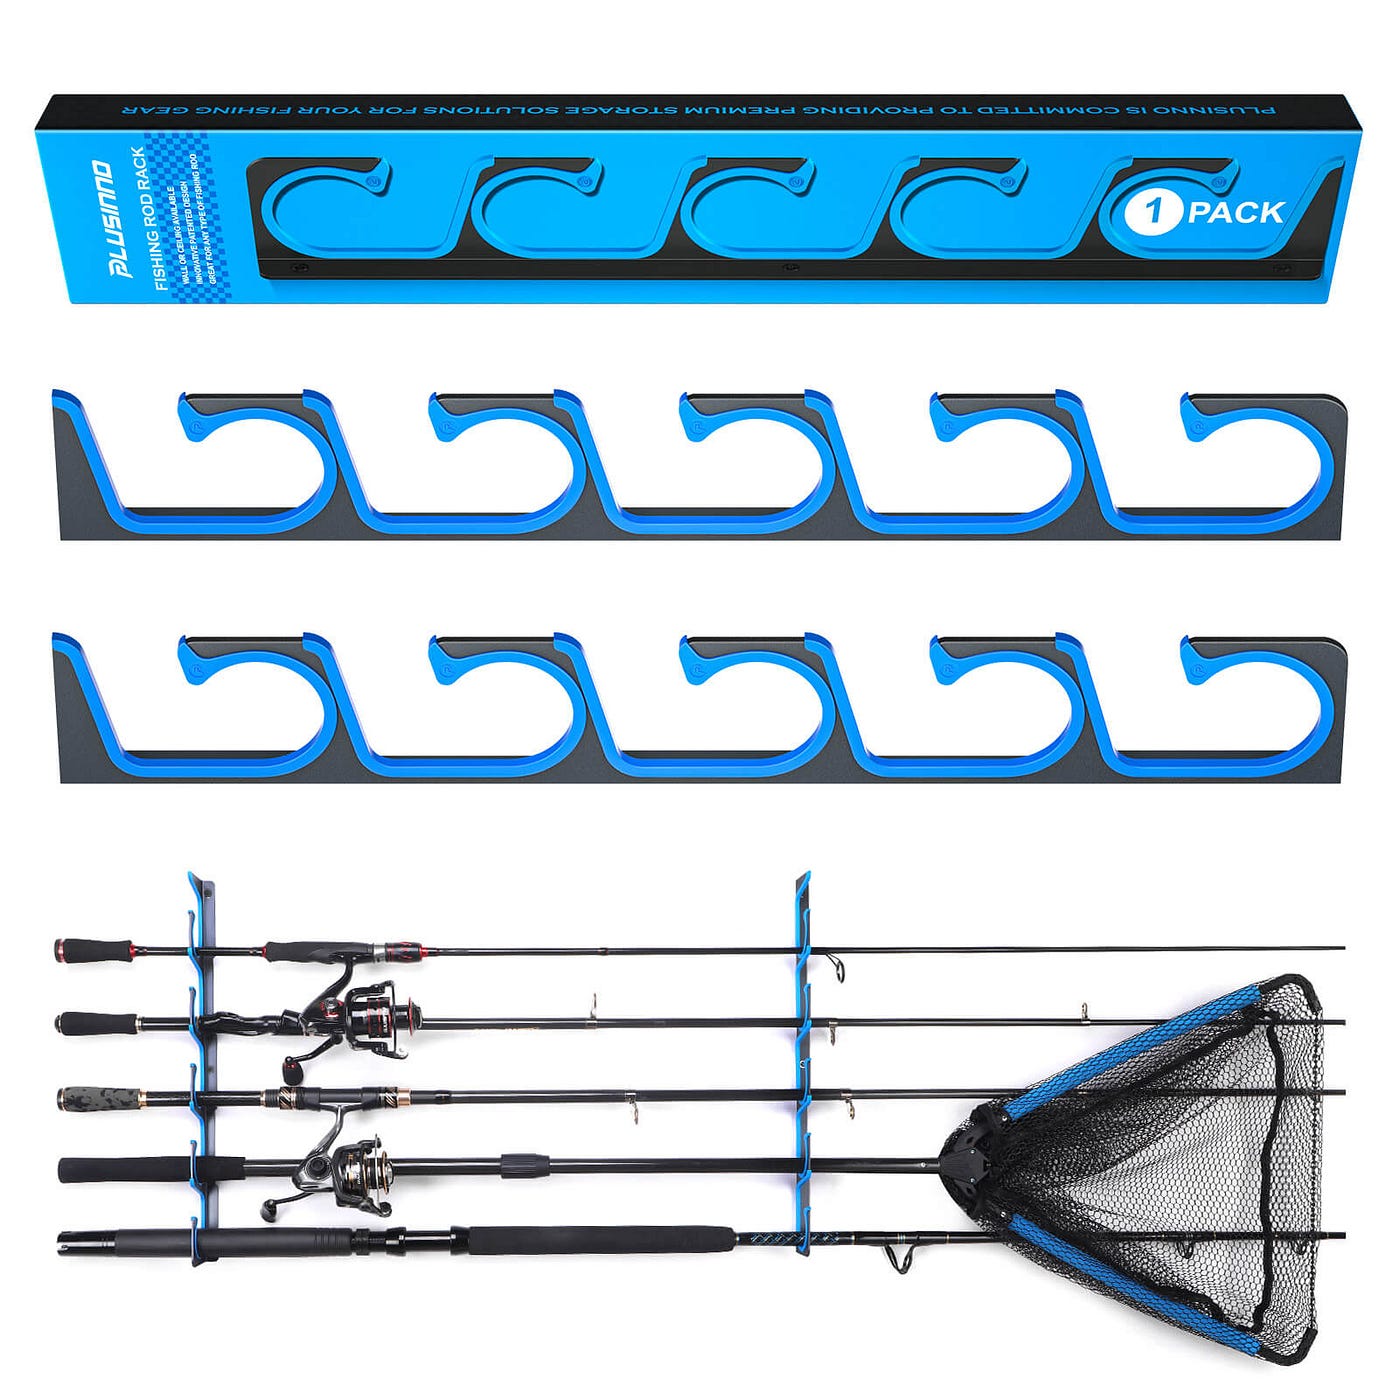 The Ultimate Guide To Buying The Right Fishing Rod Rack For Your Next Trip, by Dcudyyduc